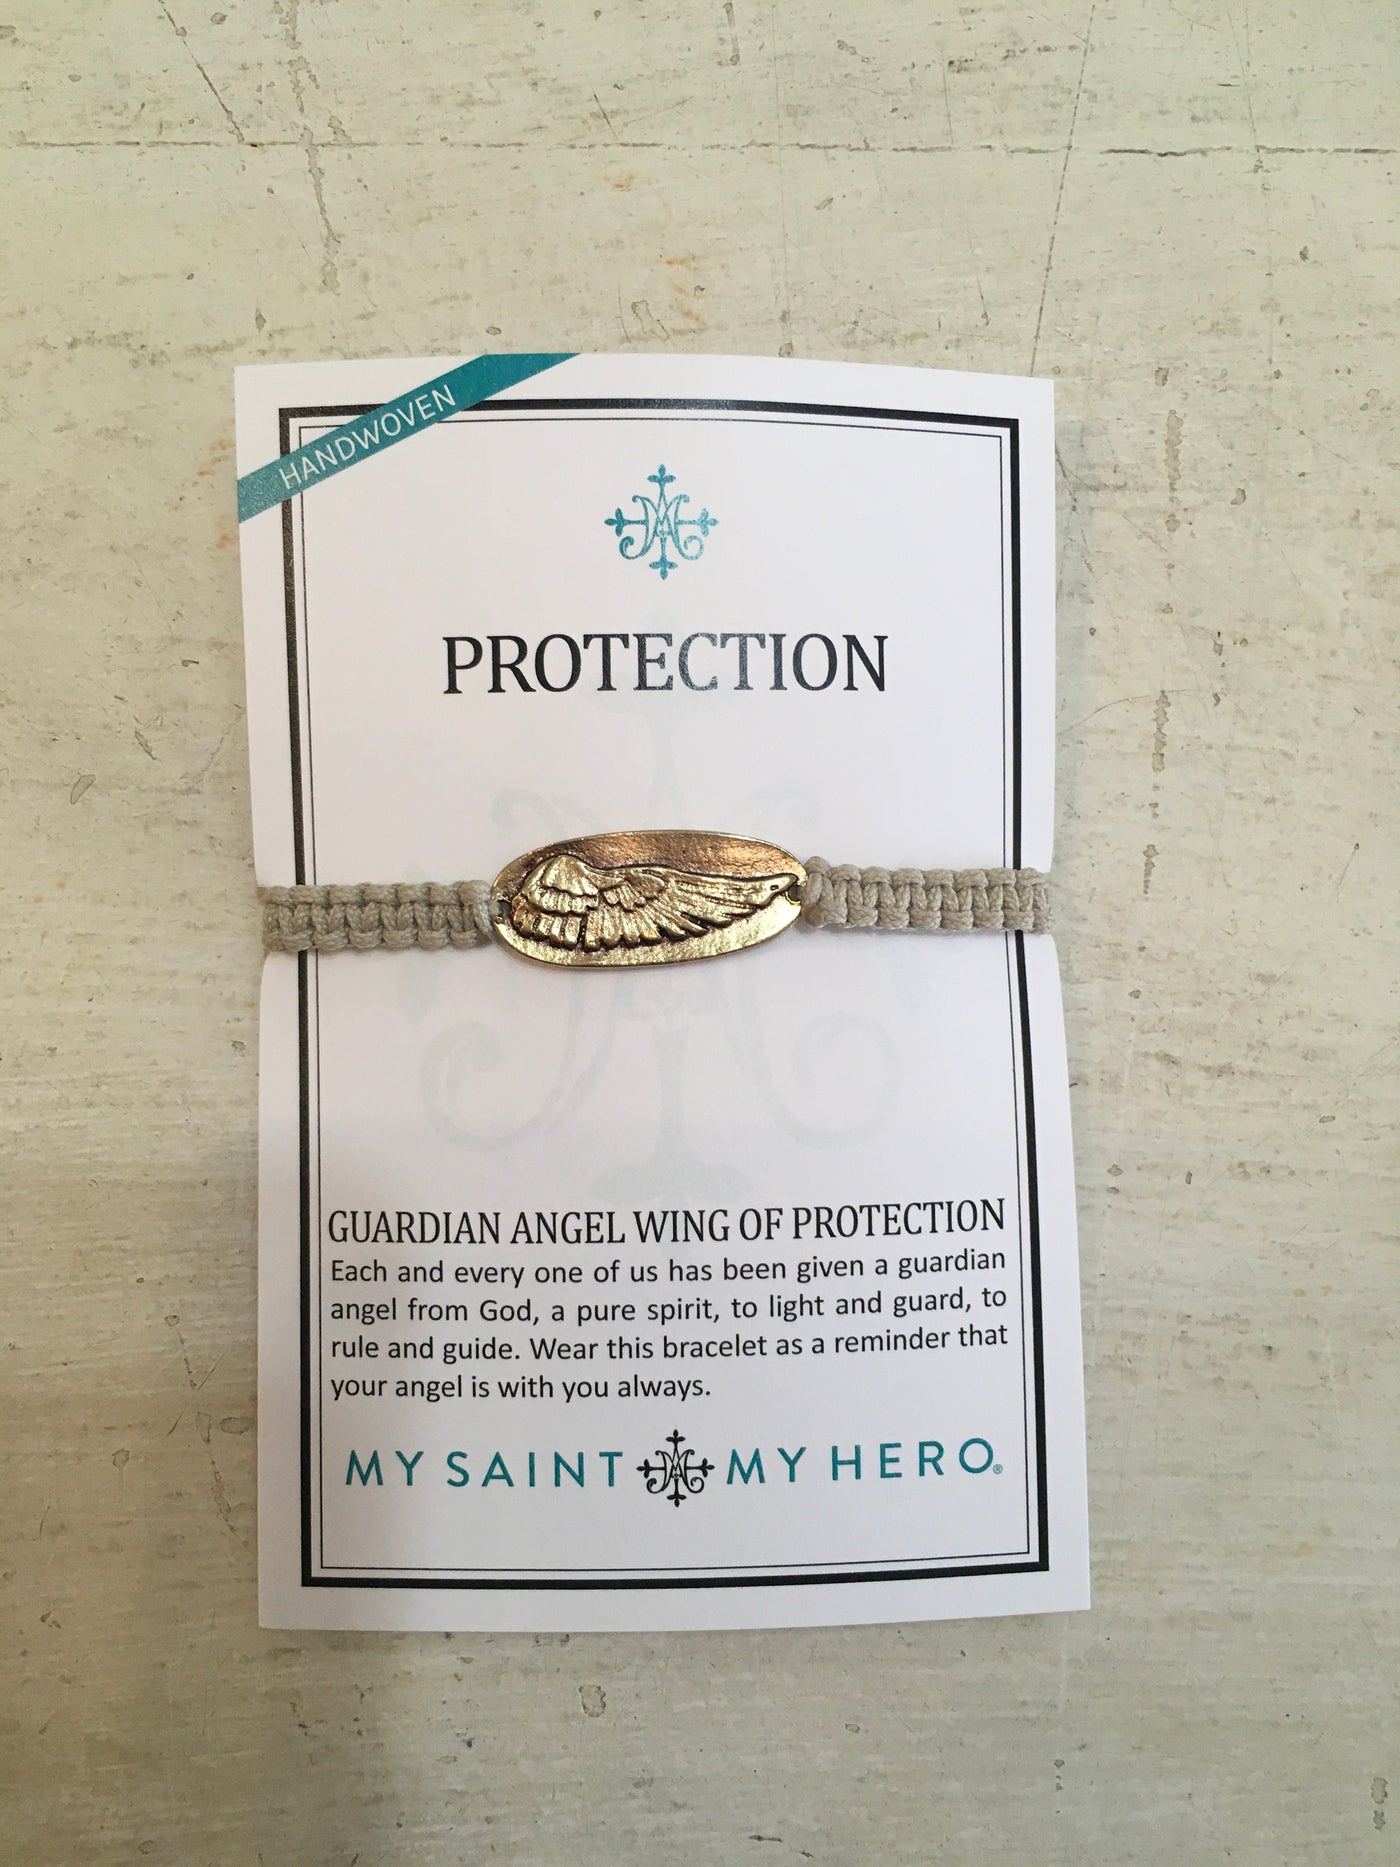 MS Protection Guardian Angel